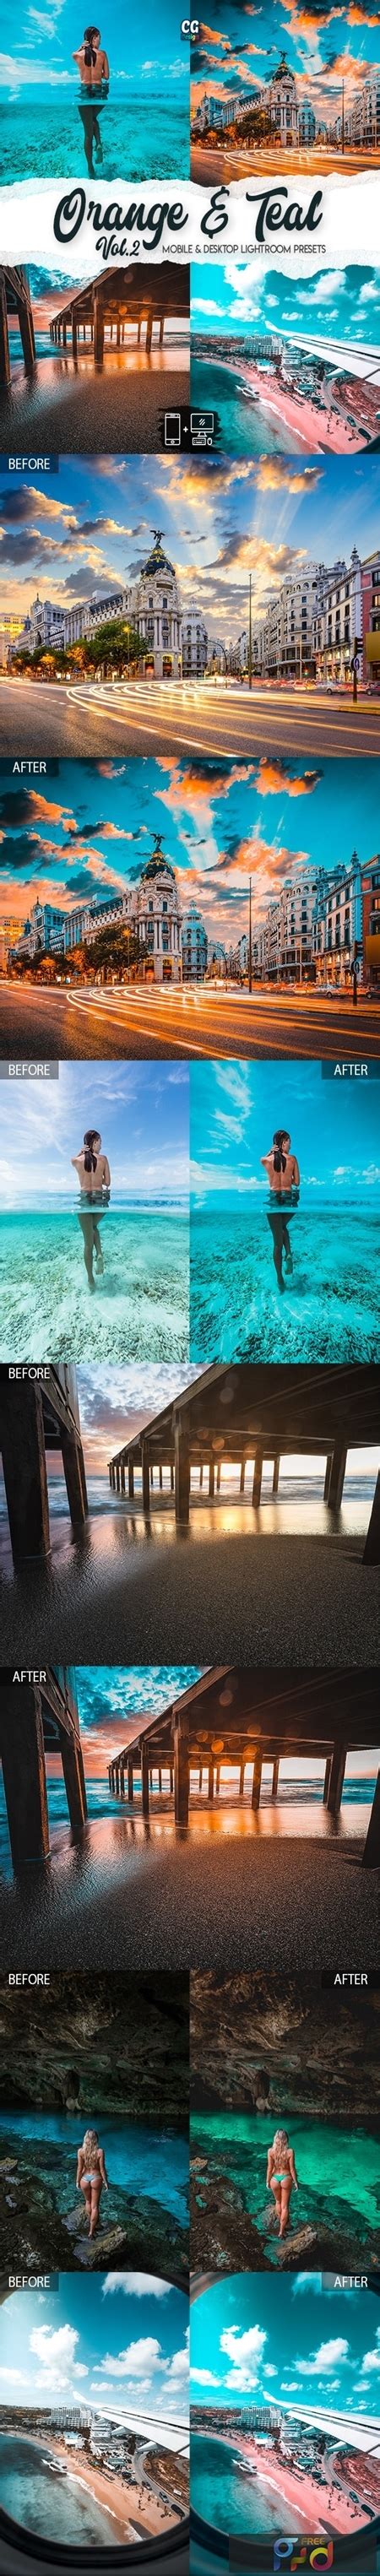 System requirements aqua and blue tone presets download hello friends, how will you all tell me about the best free lightroom presets today, today'. Teal And Orange Lightroom Mobile Preset Free Download ...